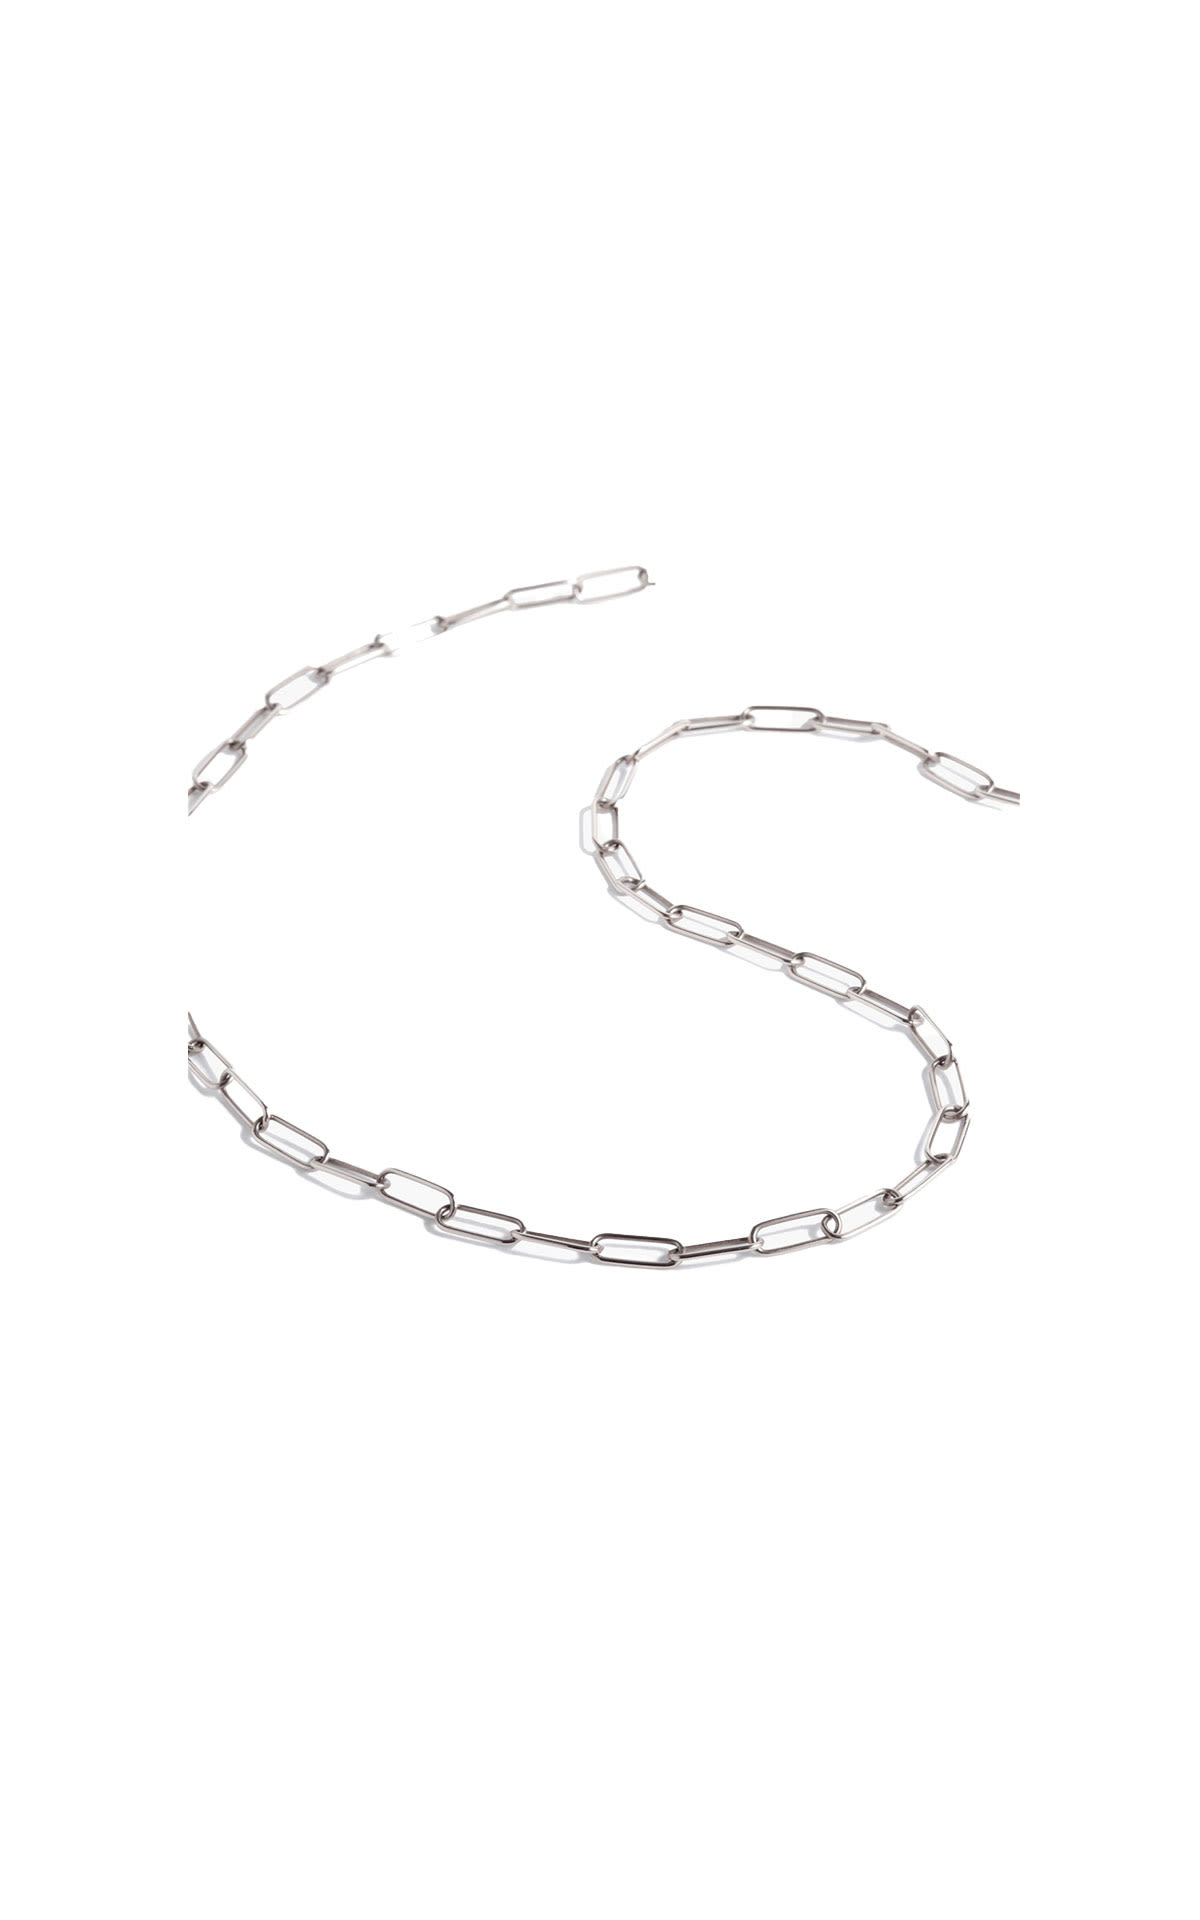 Annoushka 14ct white gold mini long cable chain 60cm from Bicester Village